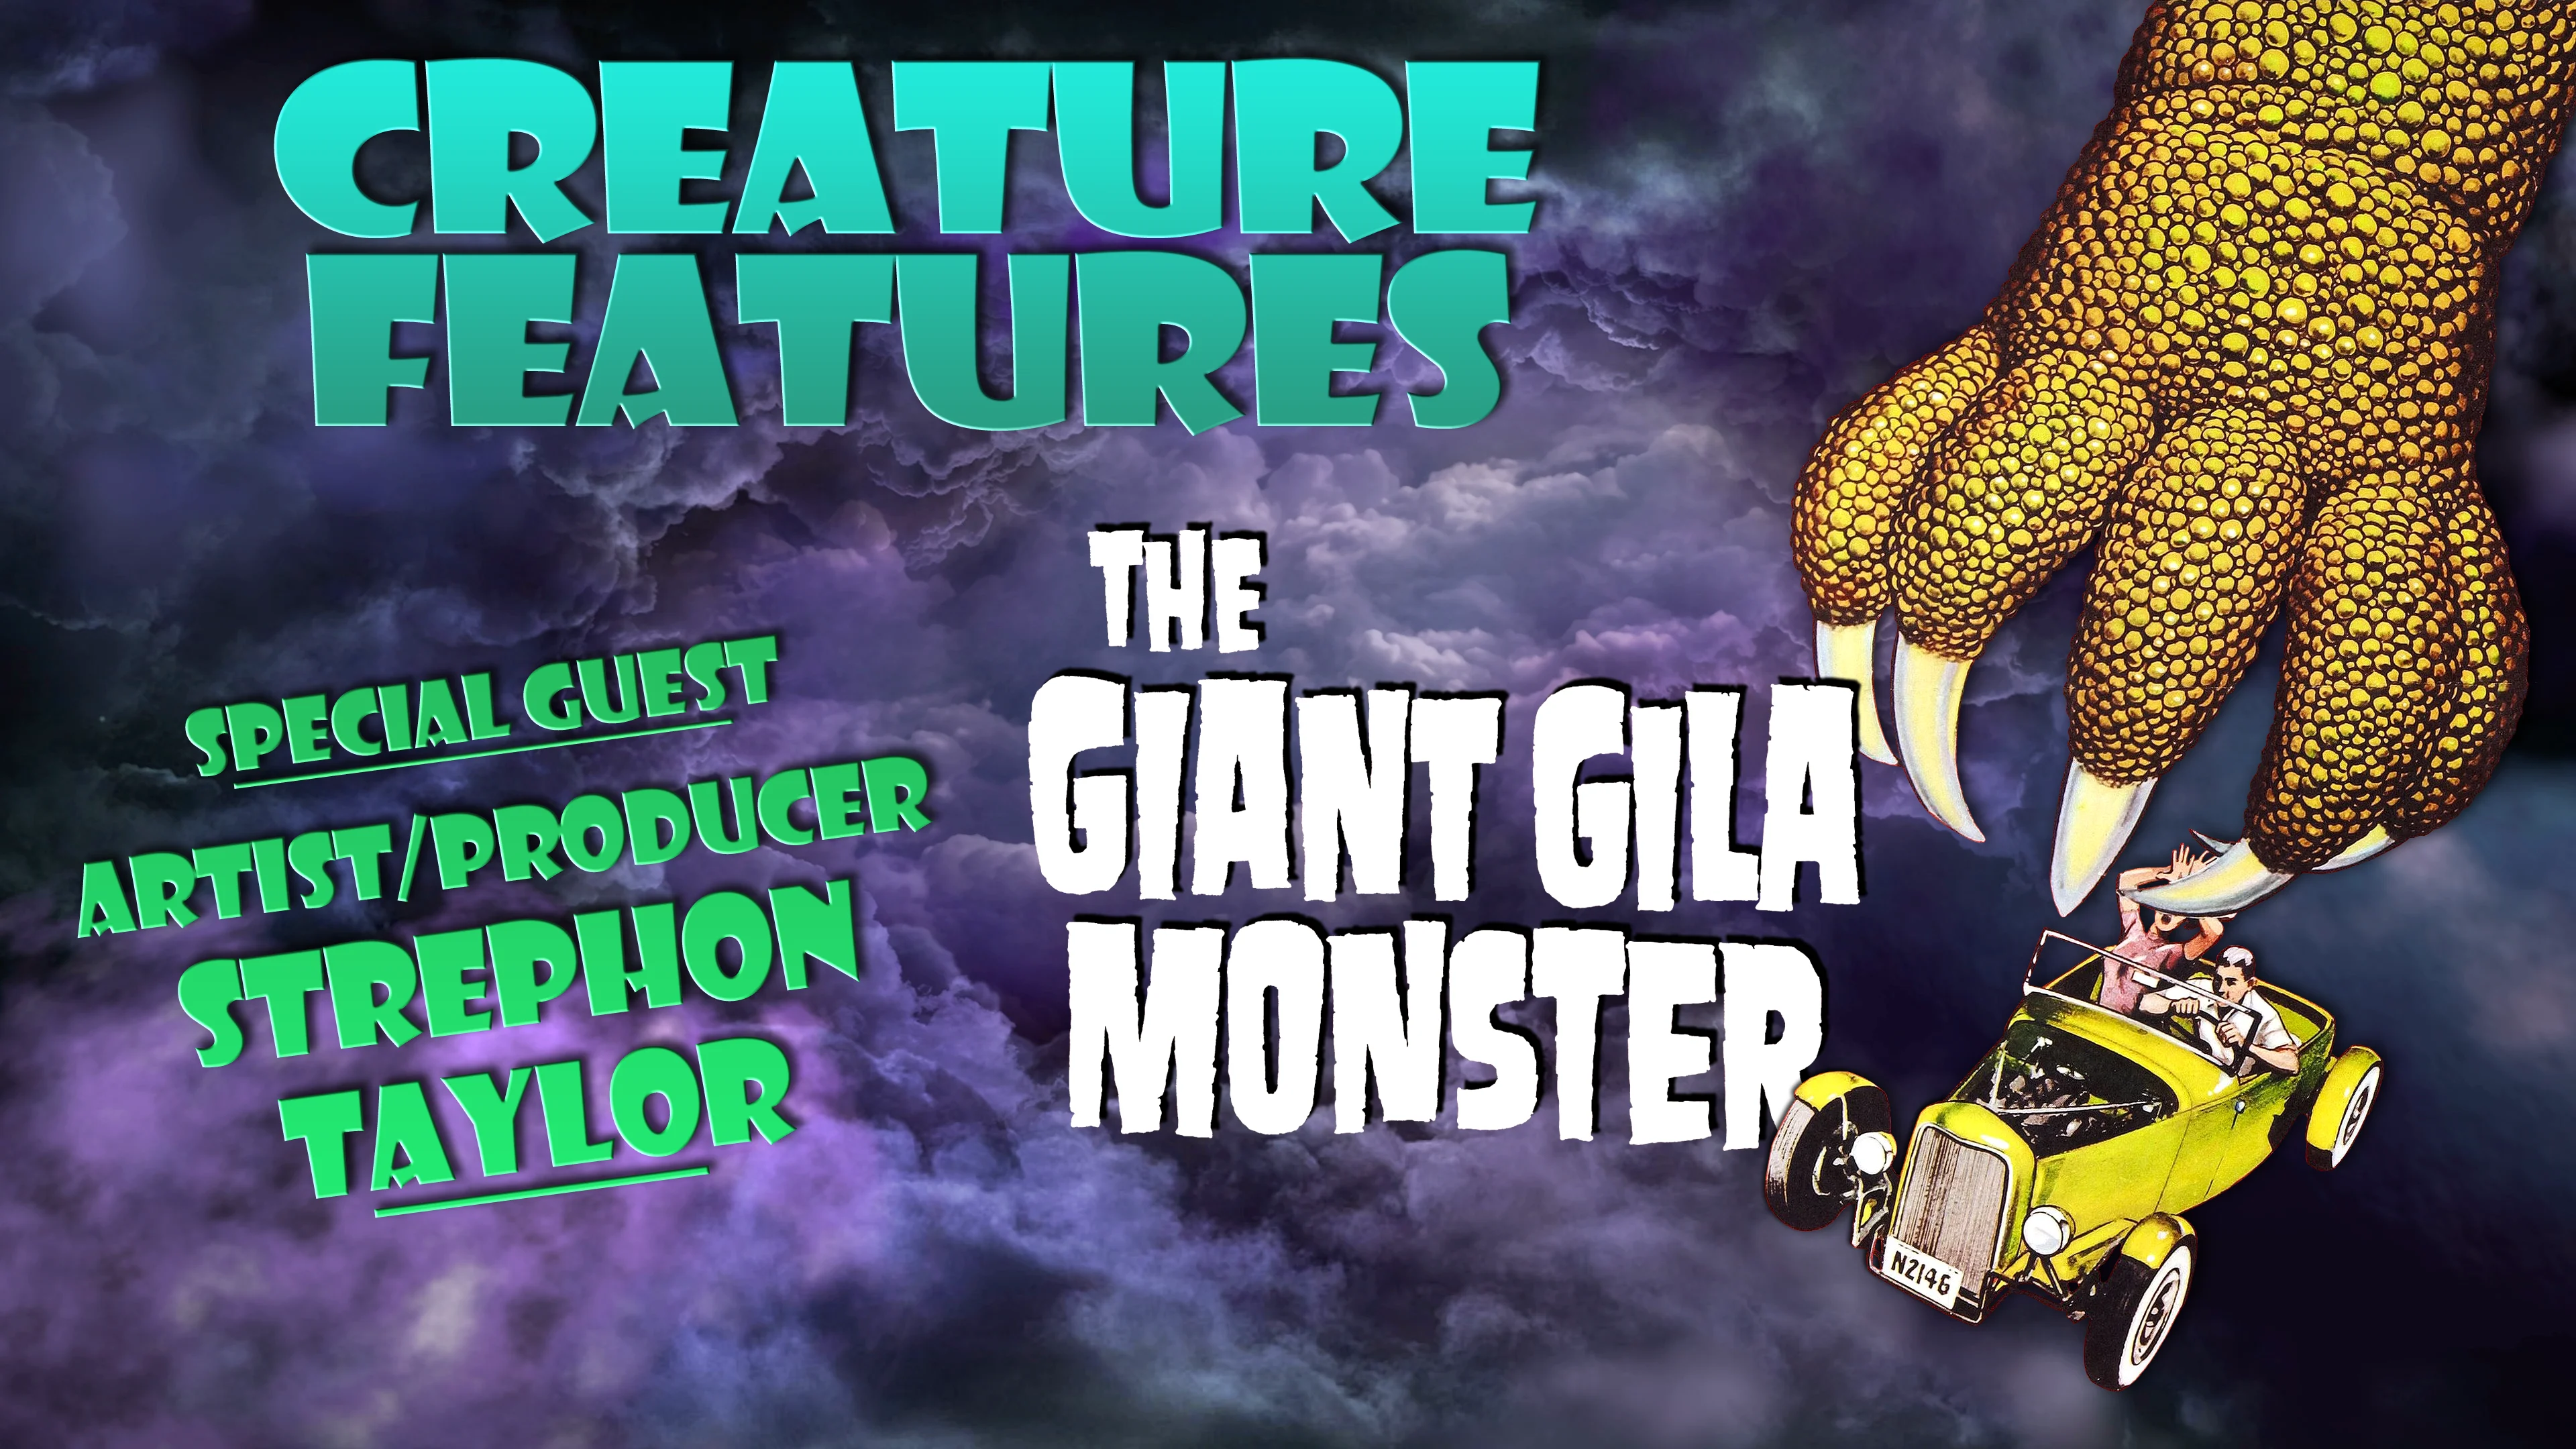 Creature Features - Strephon Taylor & The Giant Gila Monster on Vimeo